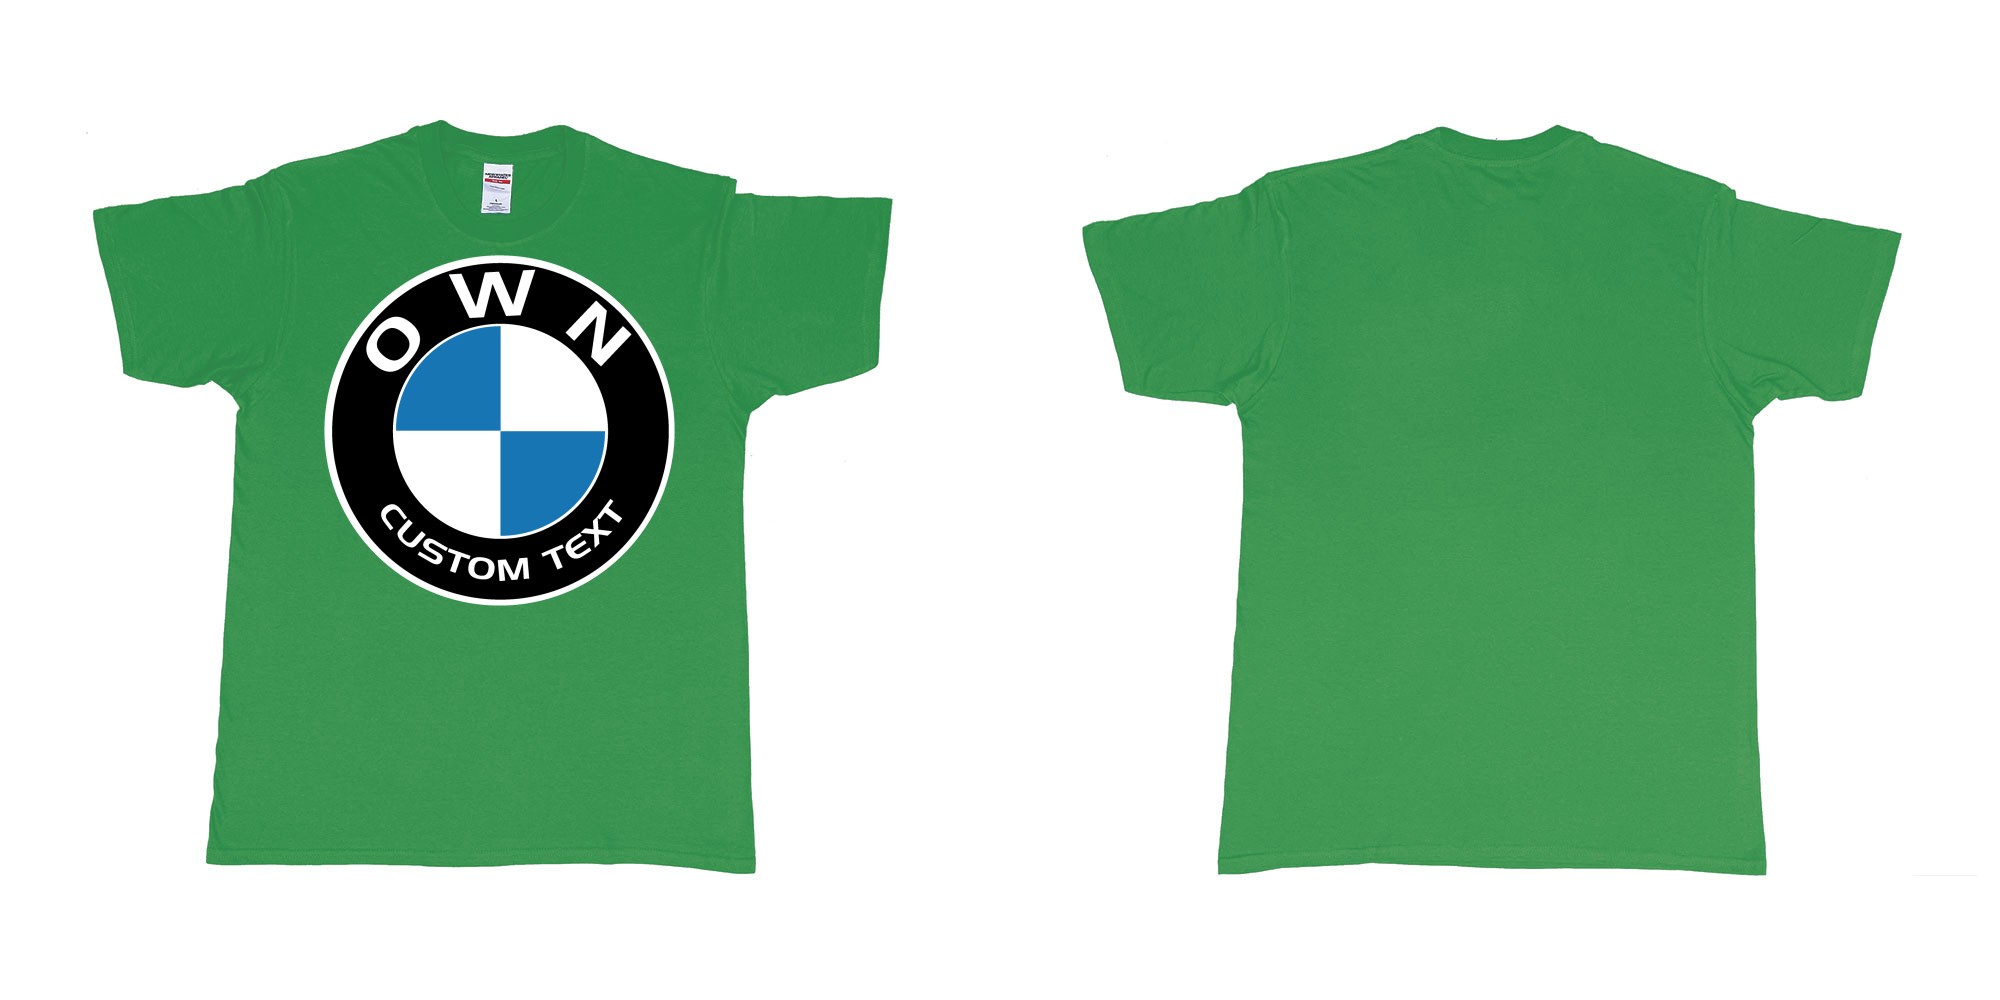 Custom tshirt design BMW logo custom text tshirt printing in fabric color irish-green choice your own text made in Bali by The Pirate Way